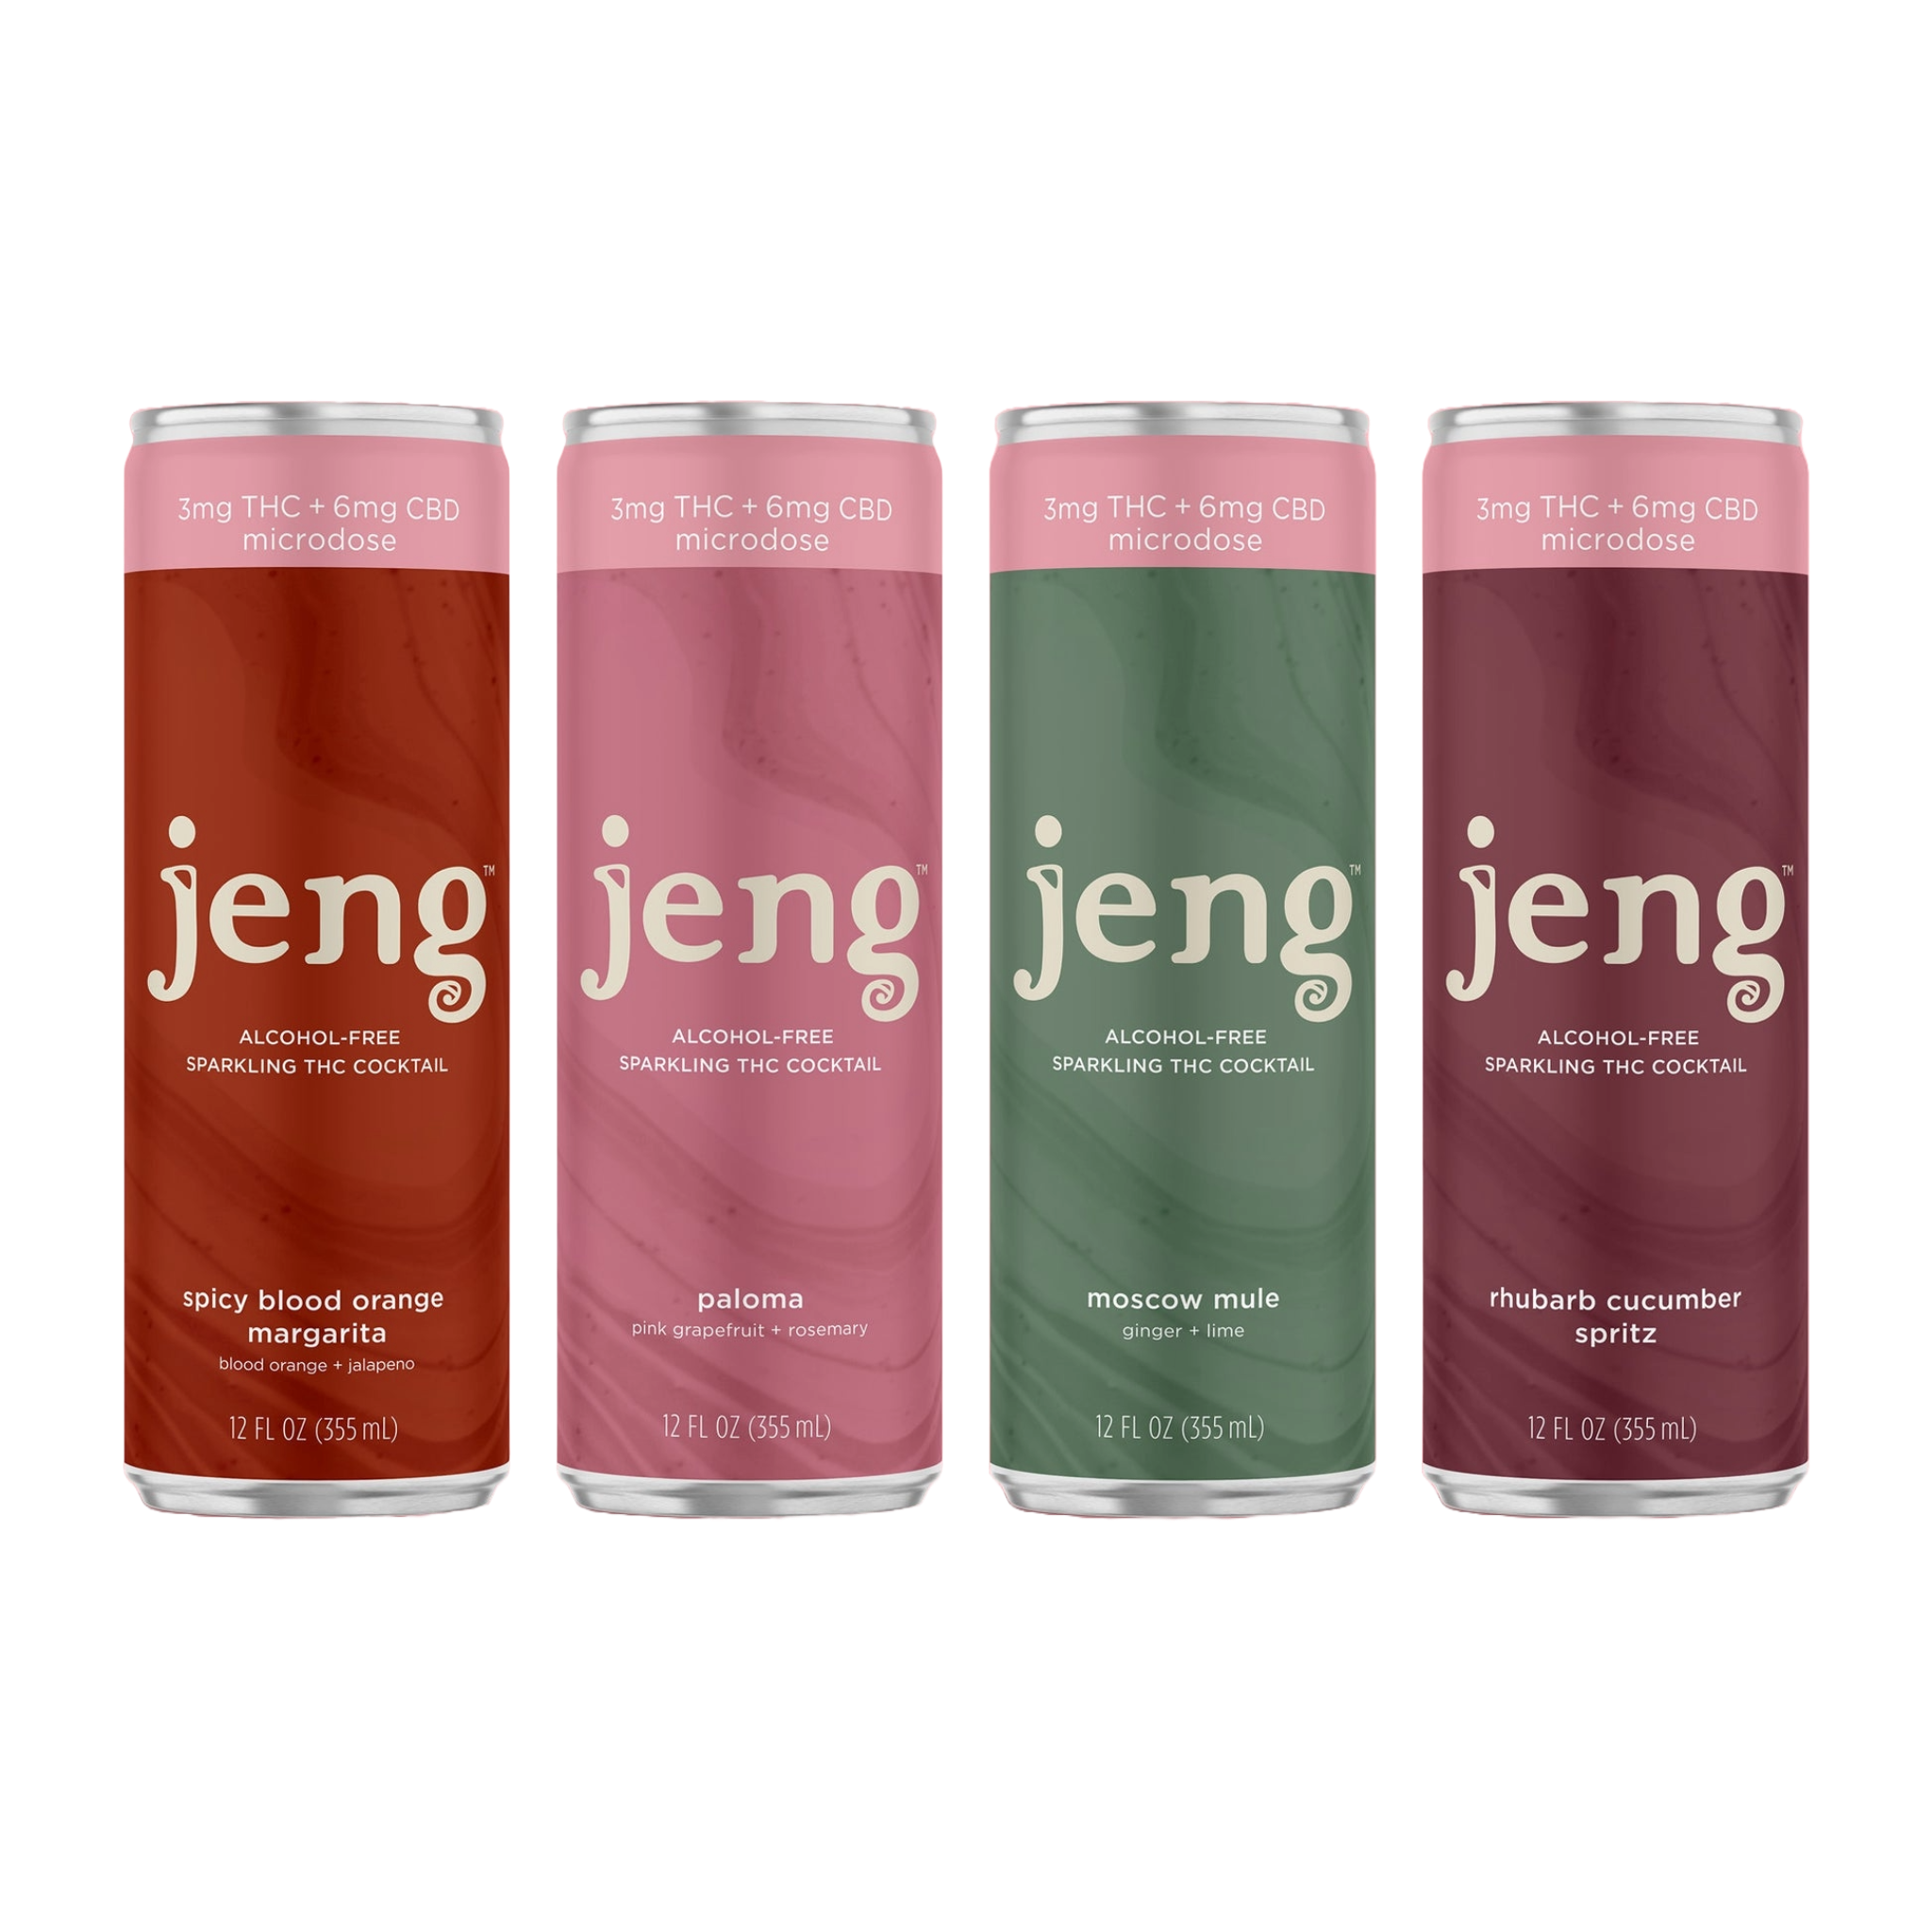 Jeng THC-Infused Collection Sampler